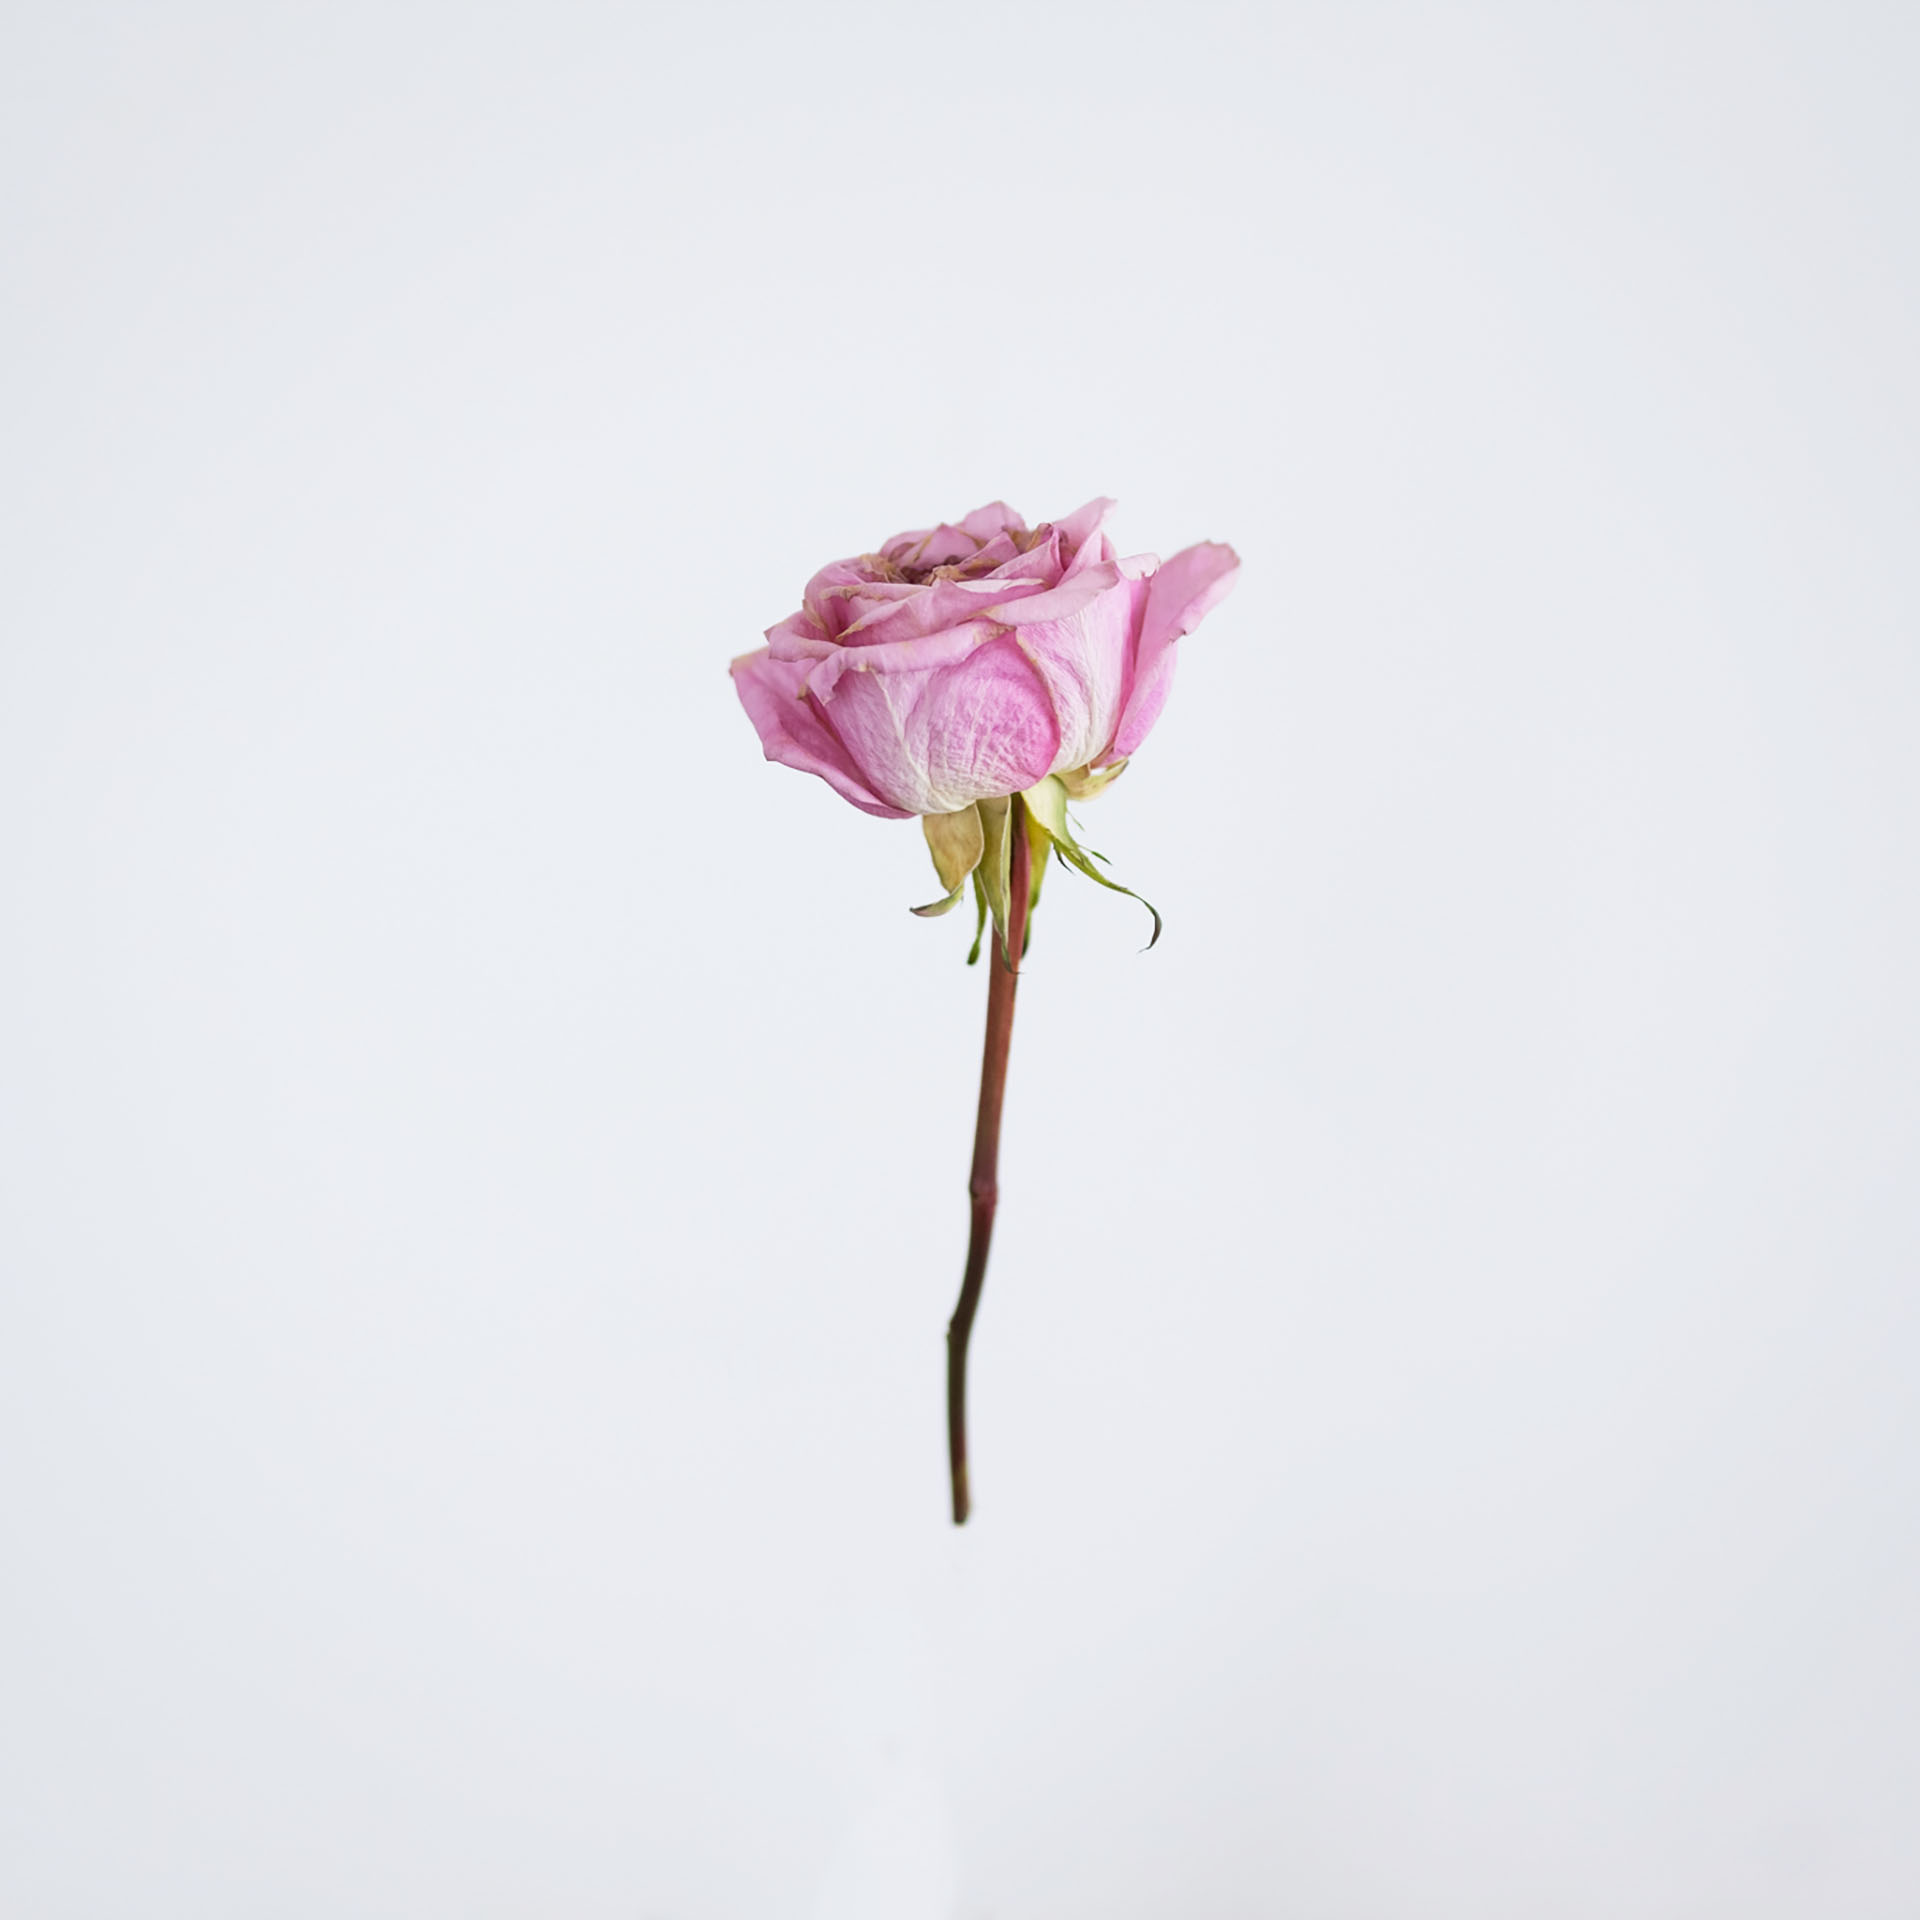 AN IMAGE OF A PINK ROSE FLOATING IN FRONT OF A WHITE BACKGROUND